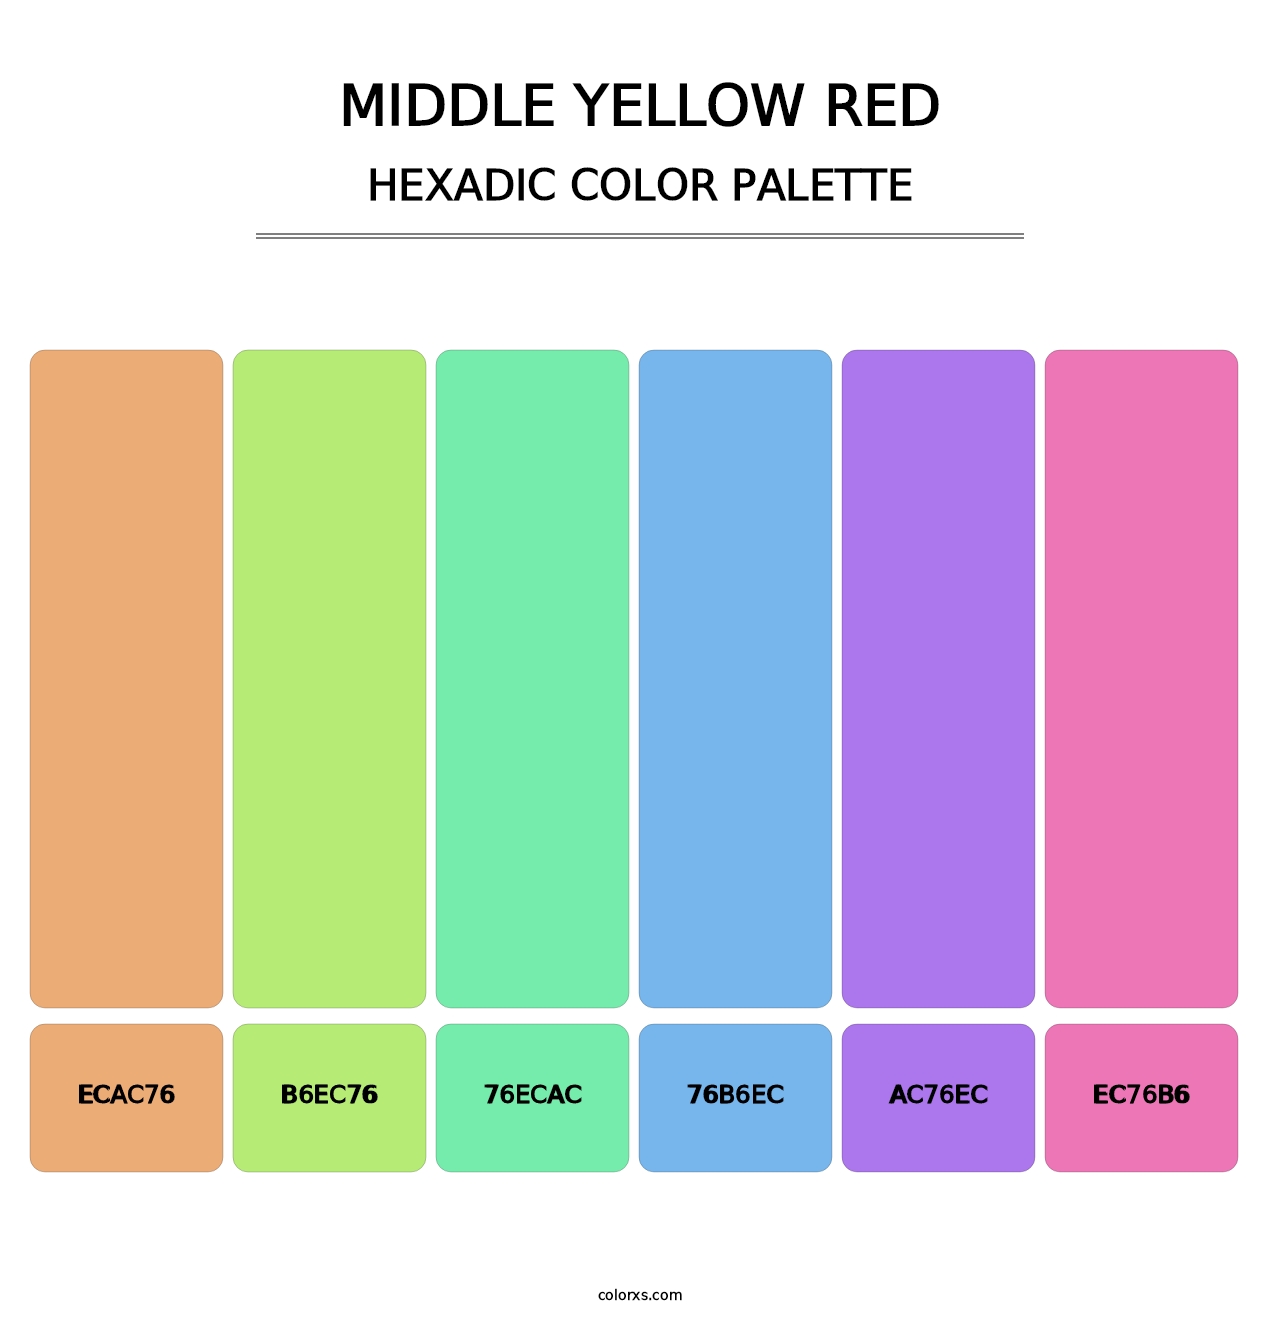 Middle Yellow Red - Hexadic Color Palette